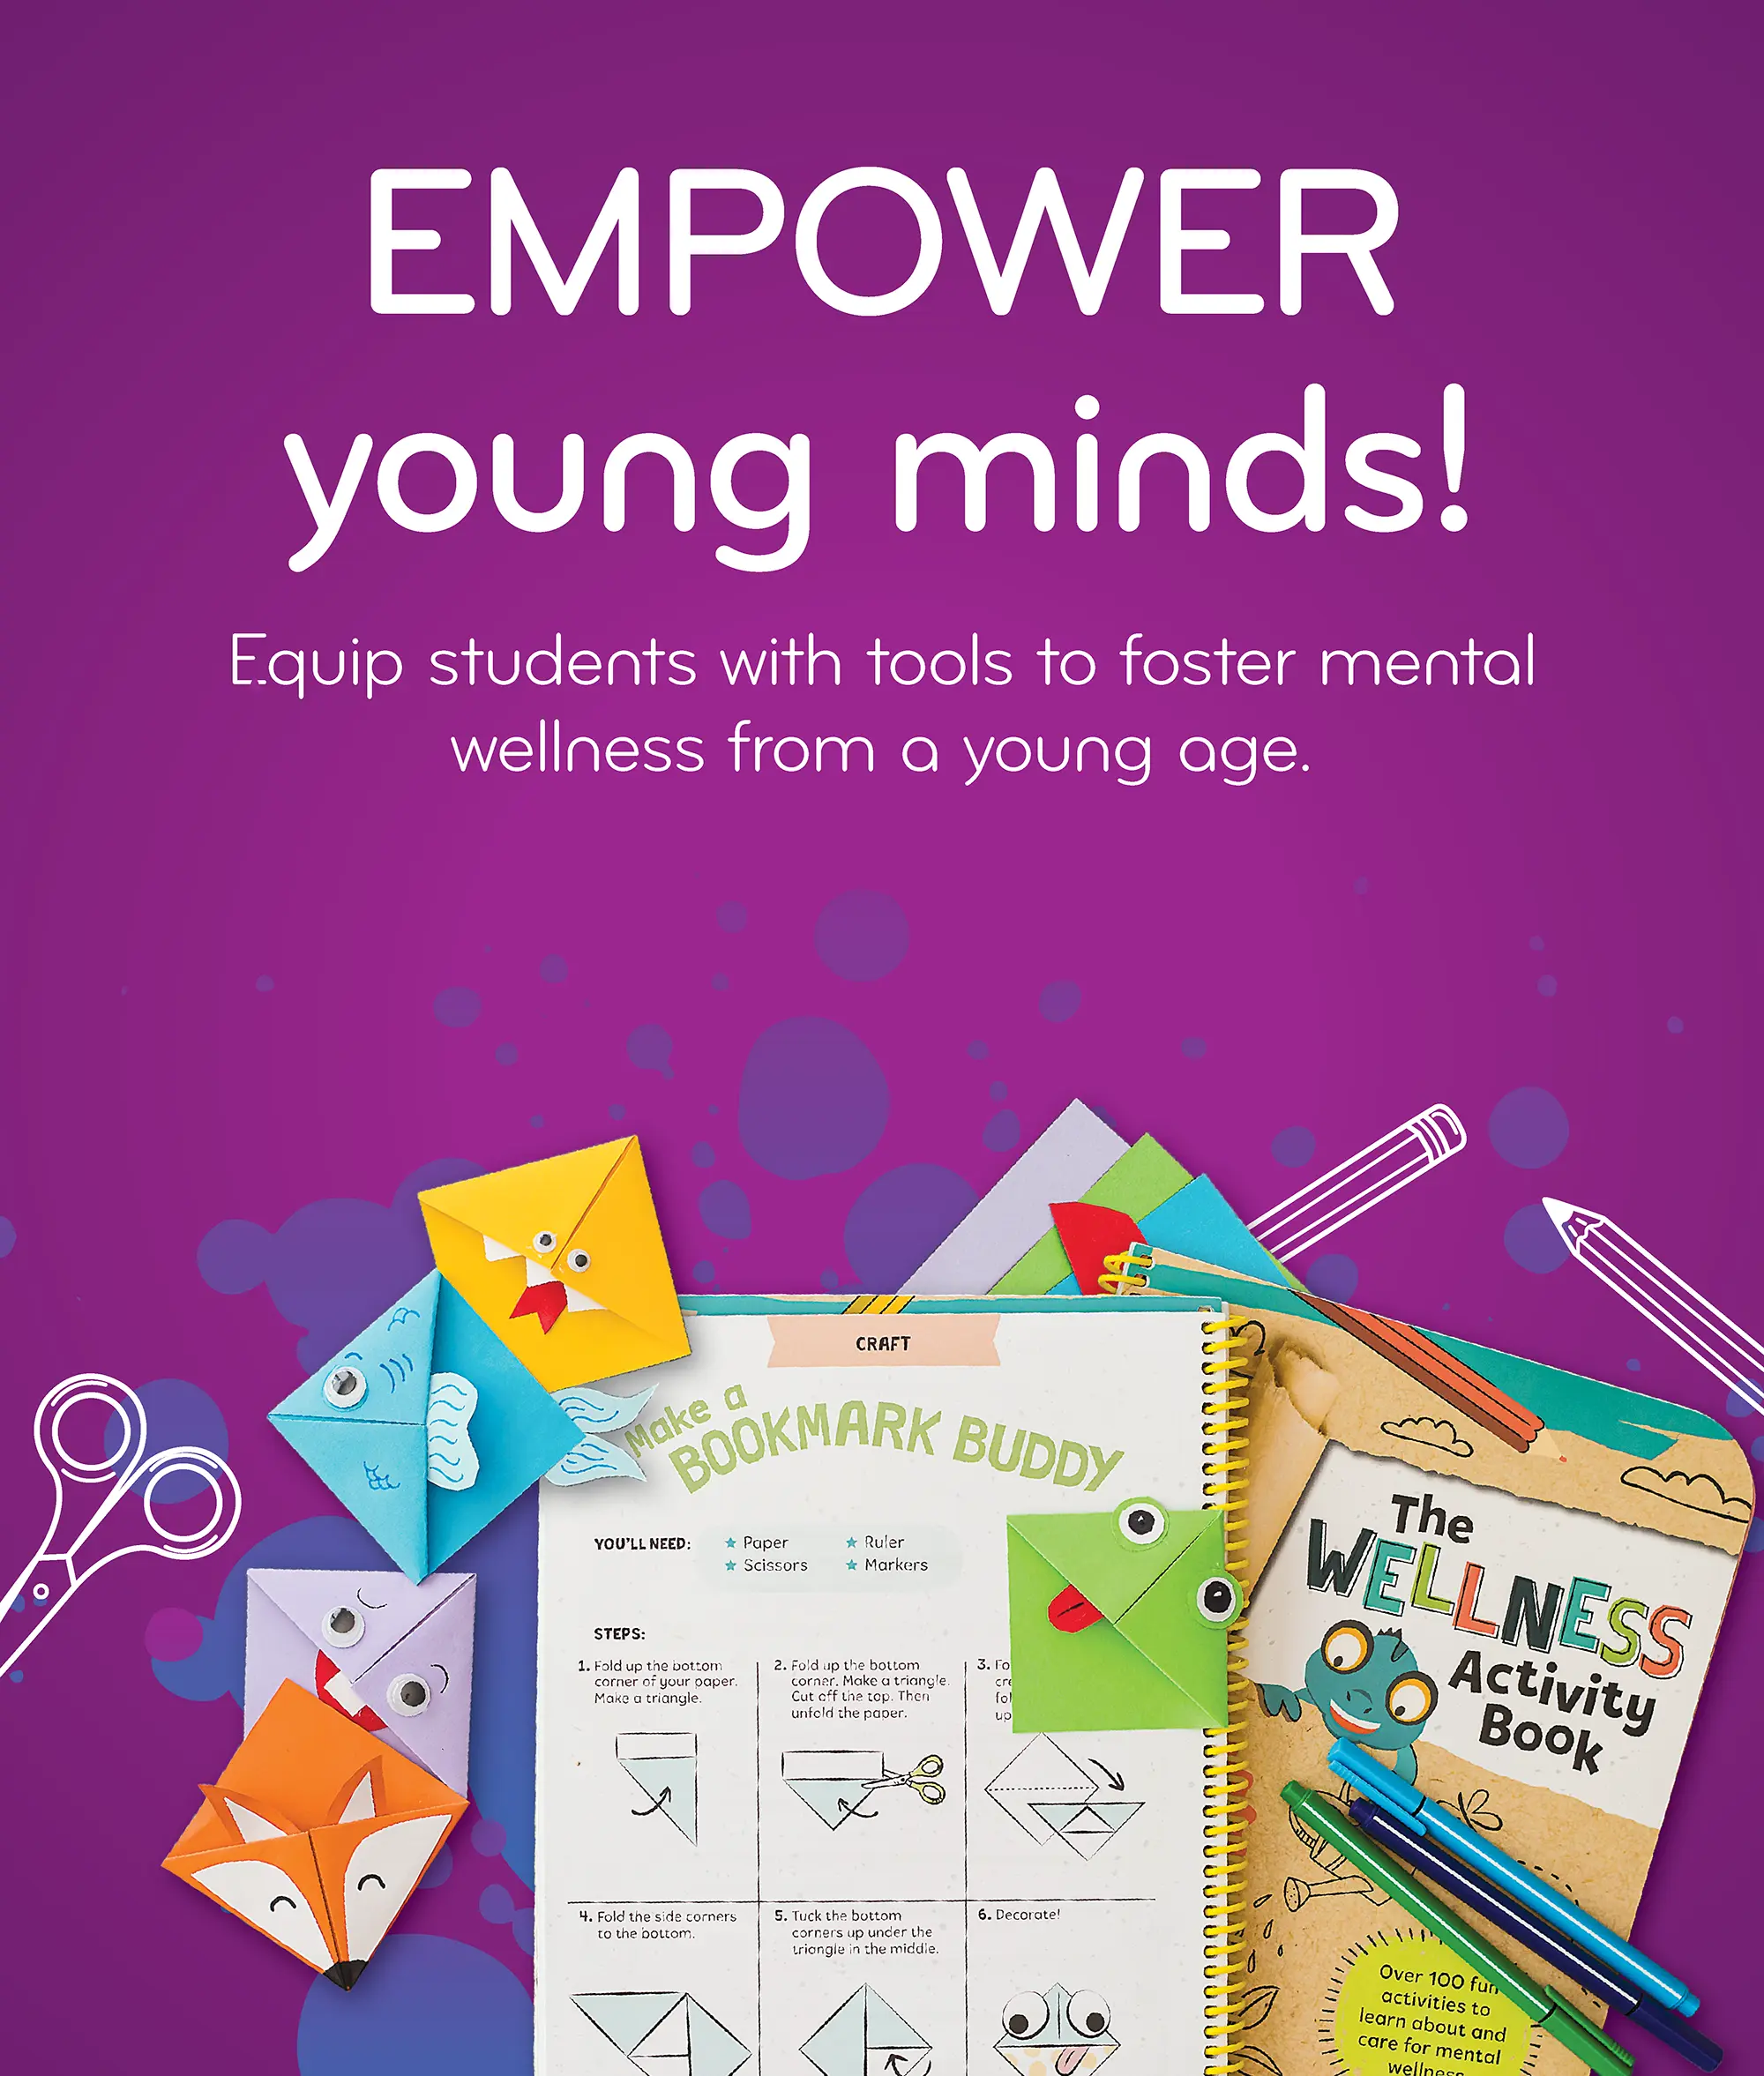 EMPOWER young minds! Equip students with tools to foster mental wellness from a young age.